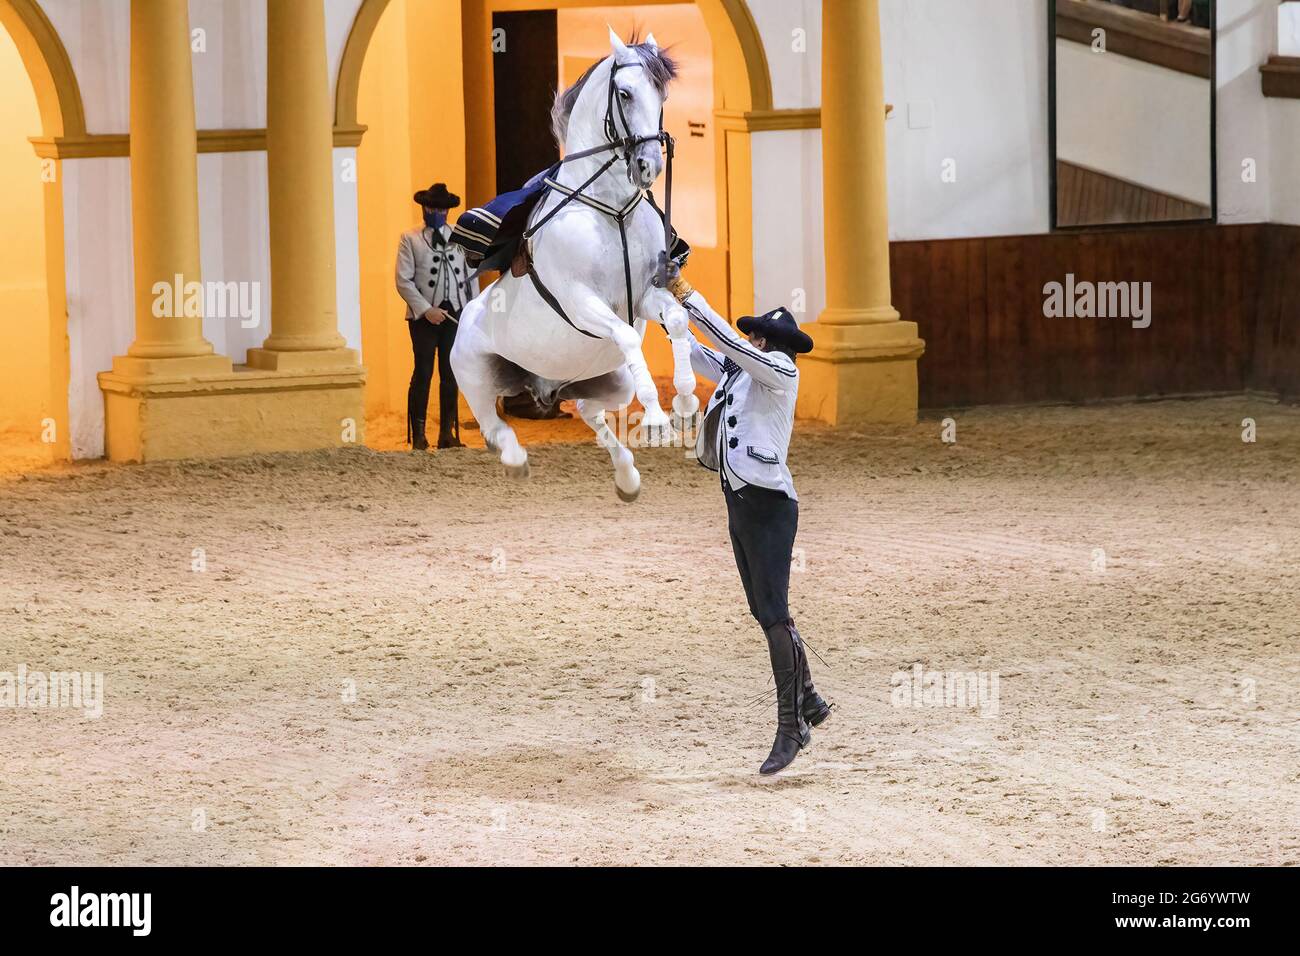 Jerez de la Frontera, Cadiz, Spain - June 17, 2021: Riders dressed with traditional dress show a white horse dance of purebred executing a jump as a s Stock Photo